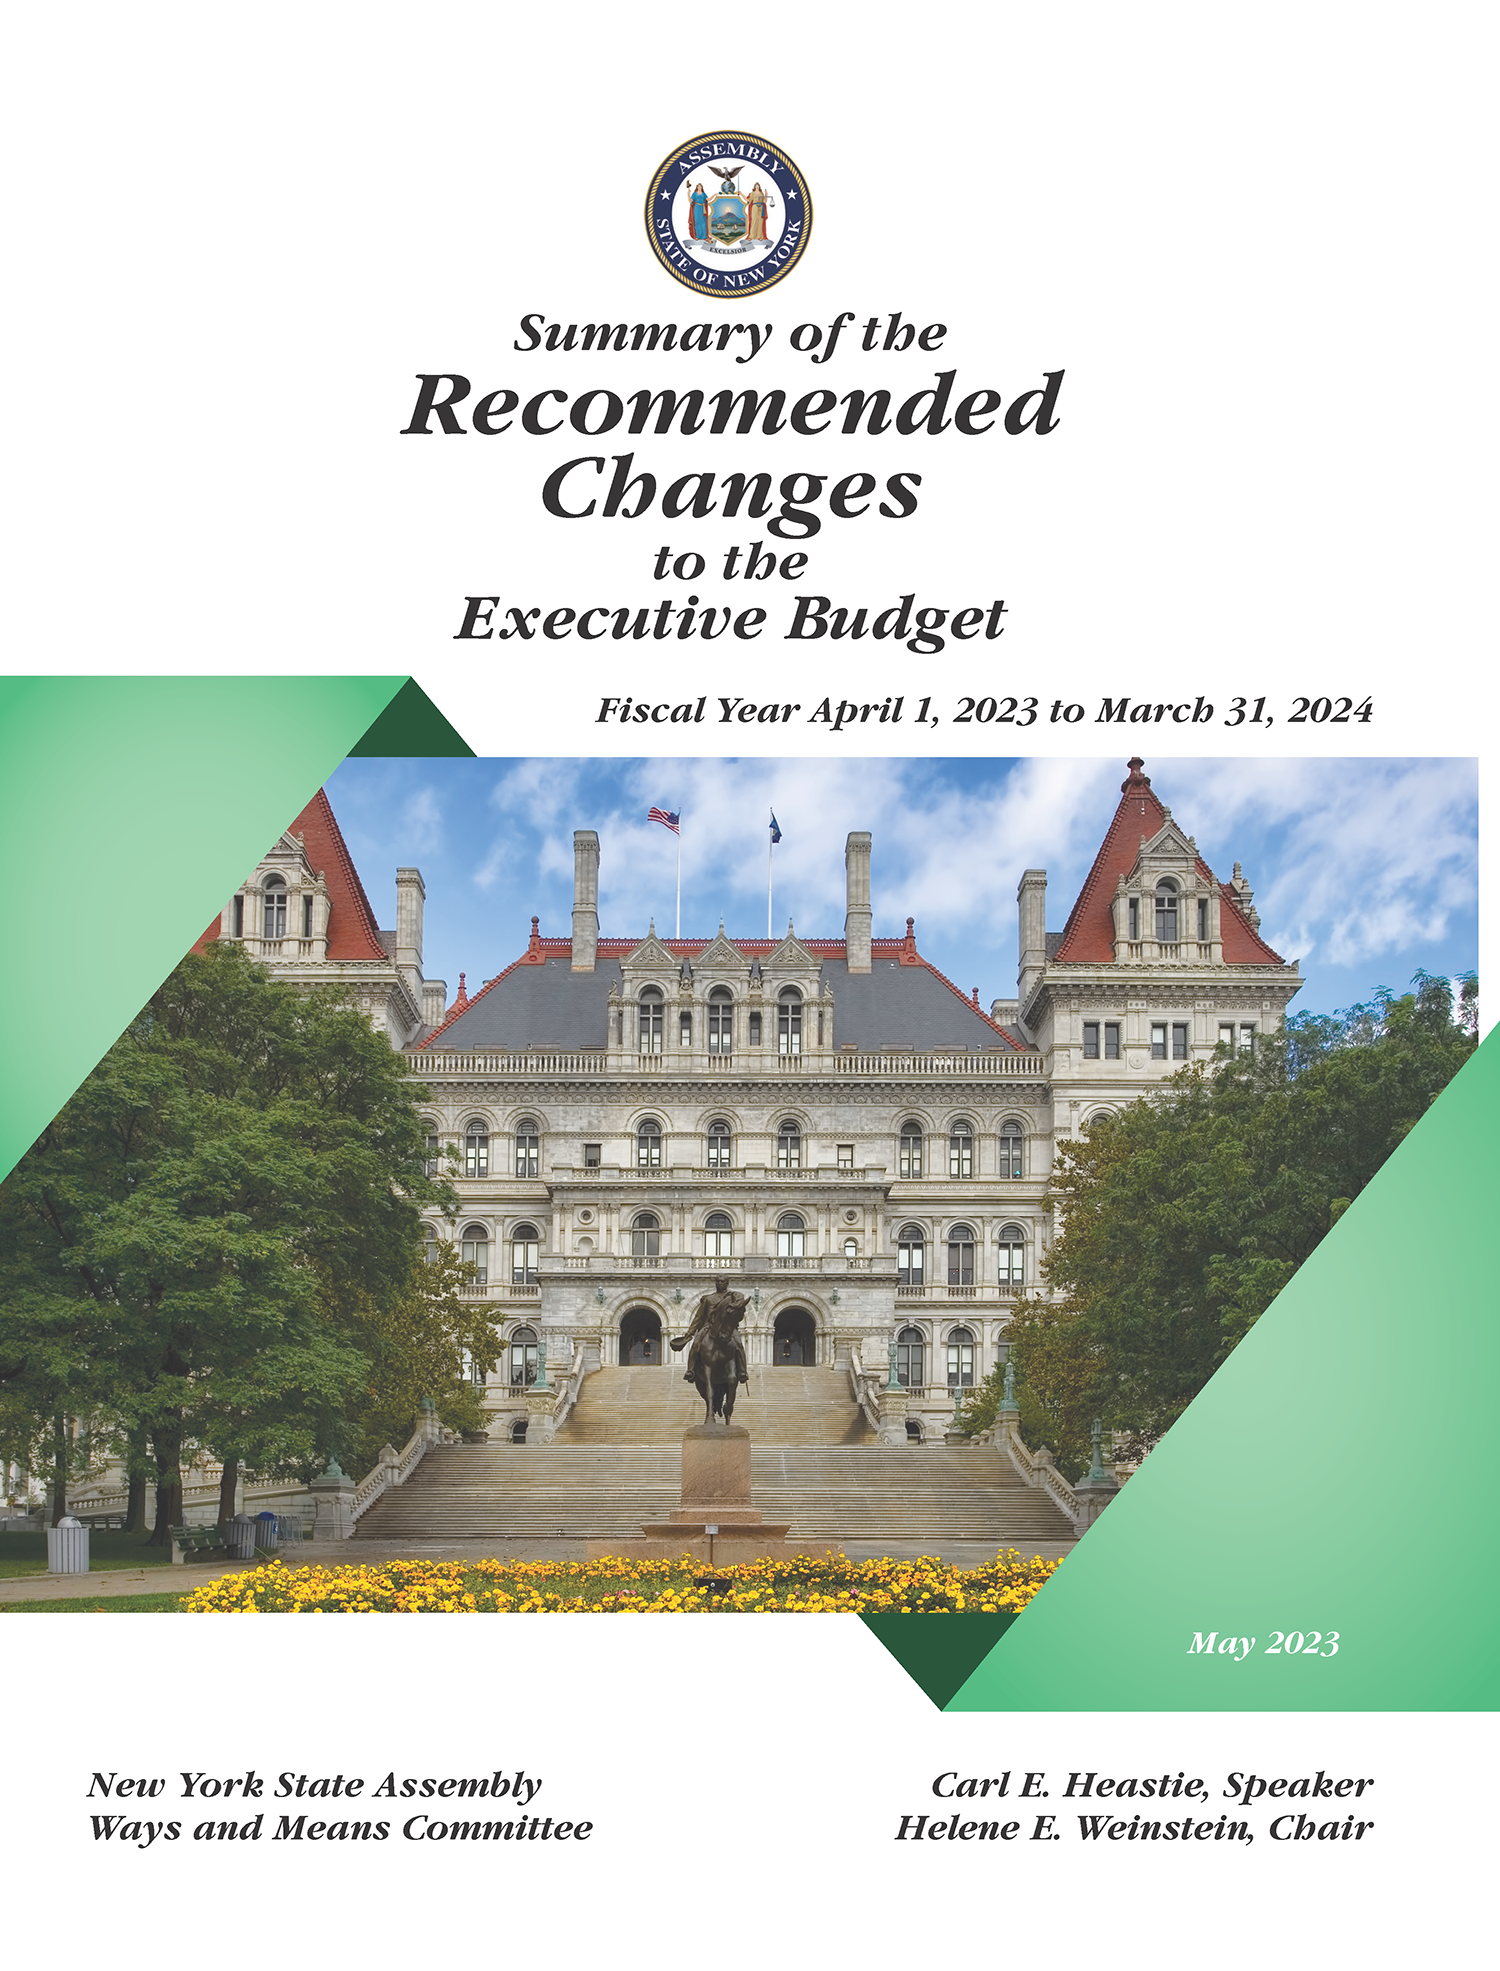 Summary of Recommended Changes to the Executive Budget